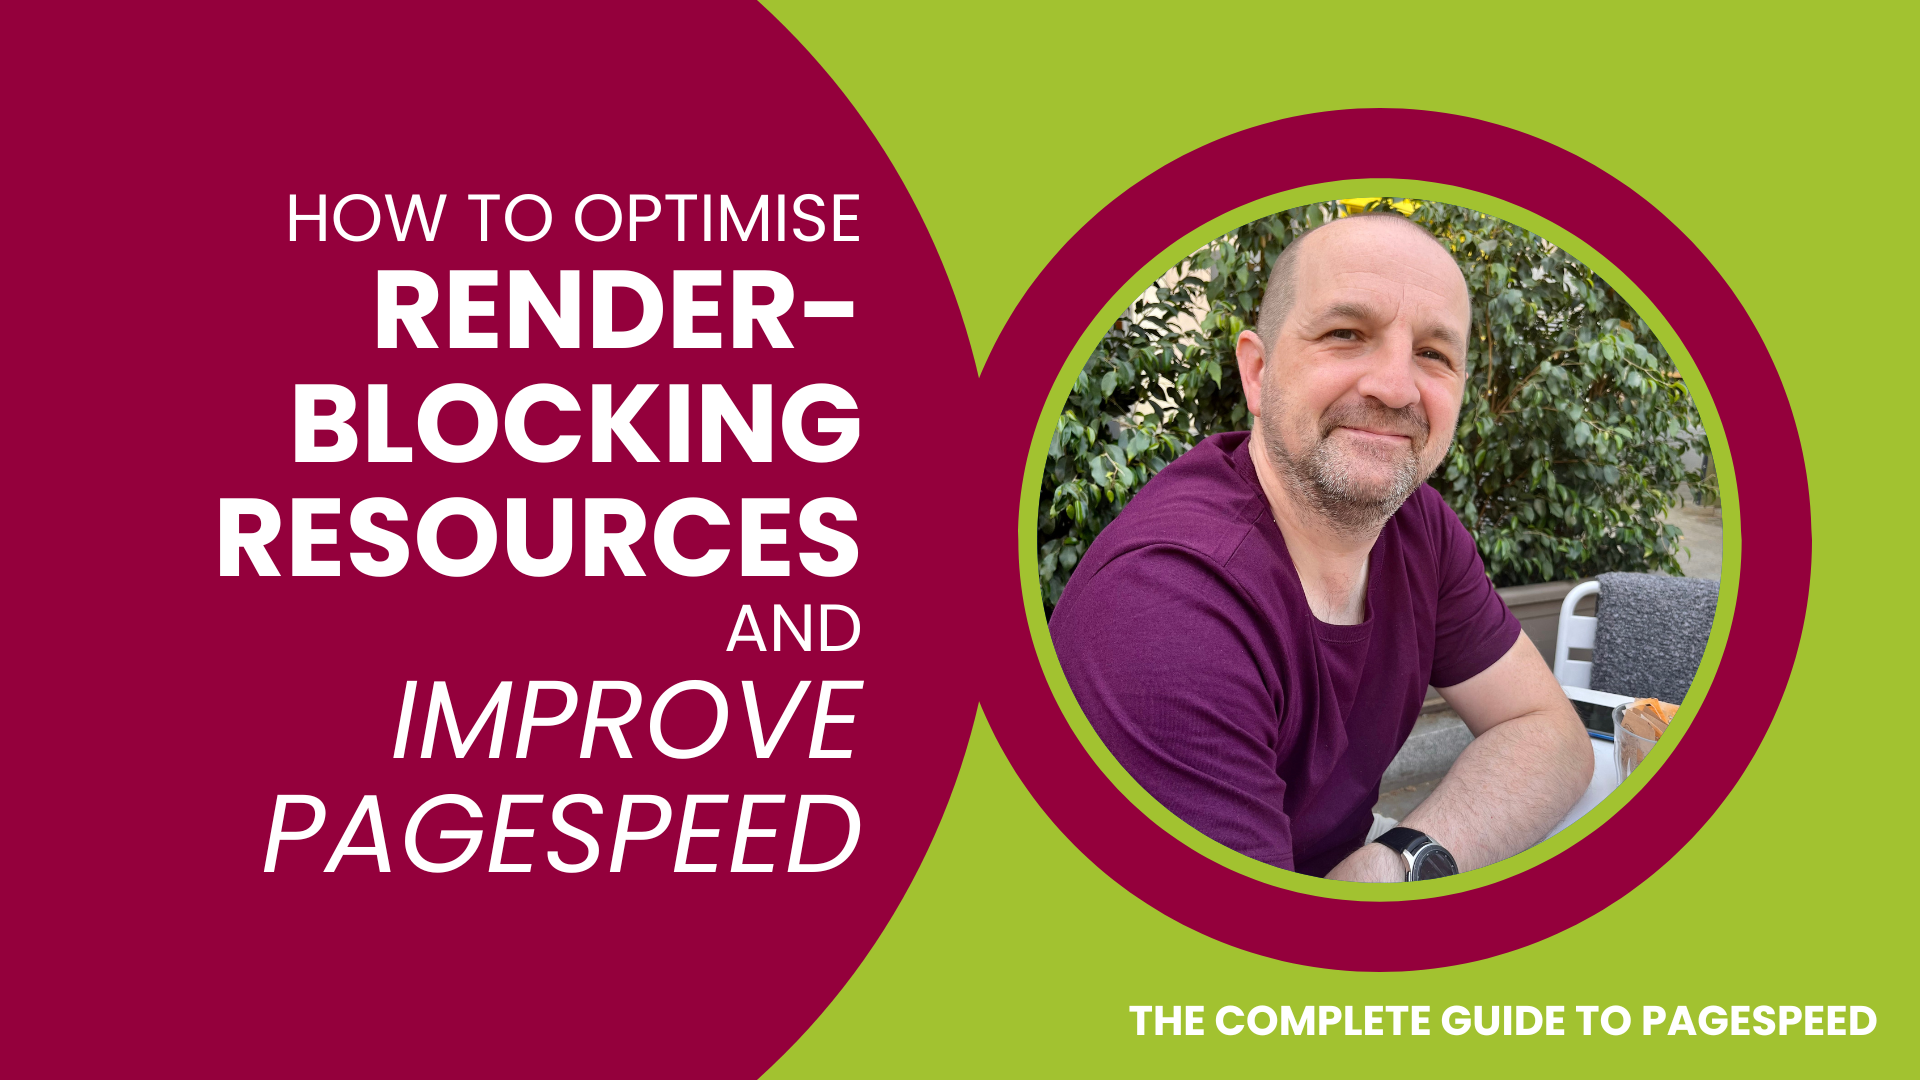 How to Optimise Render-Blocking Resources and Improve Pagespeed